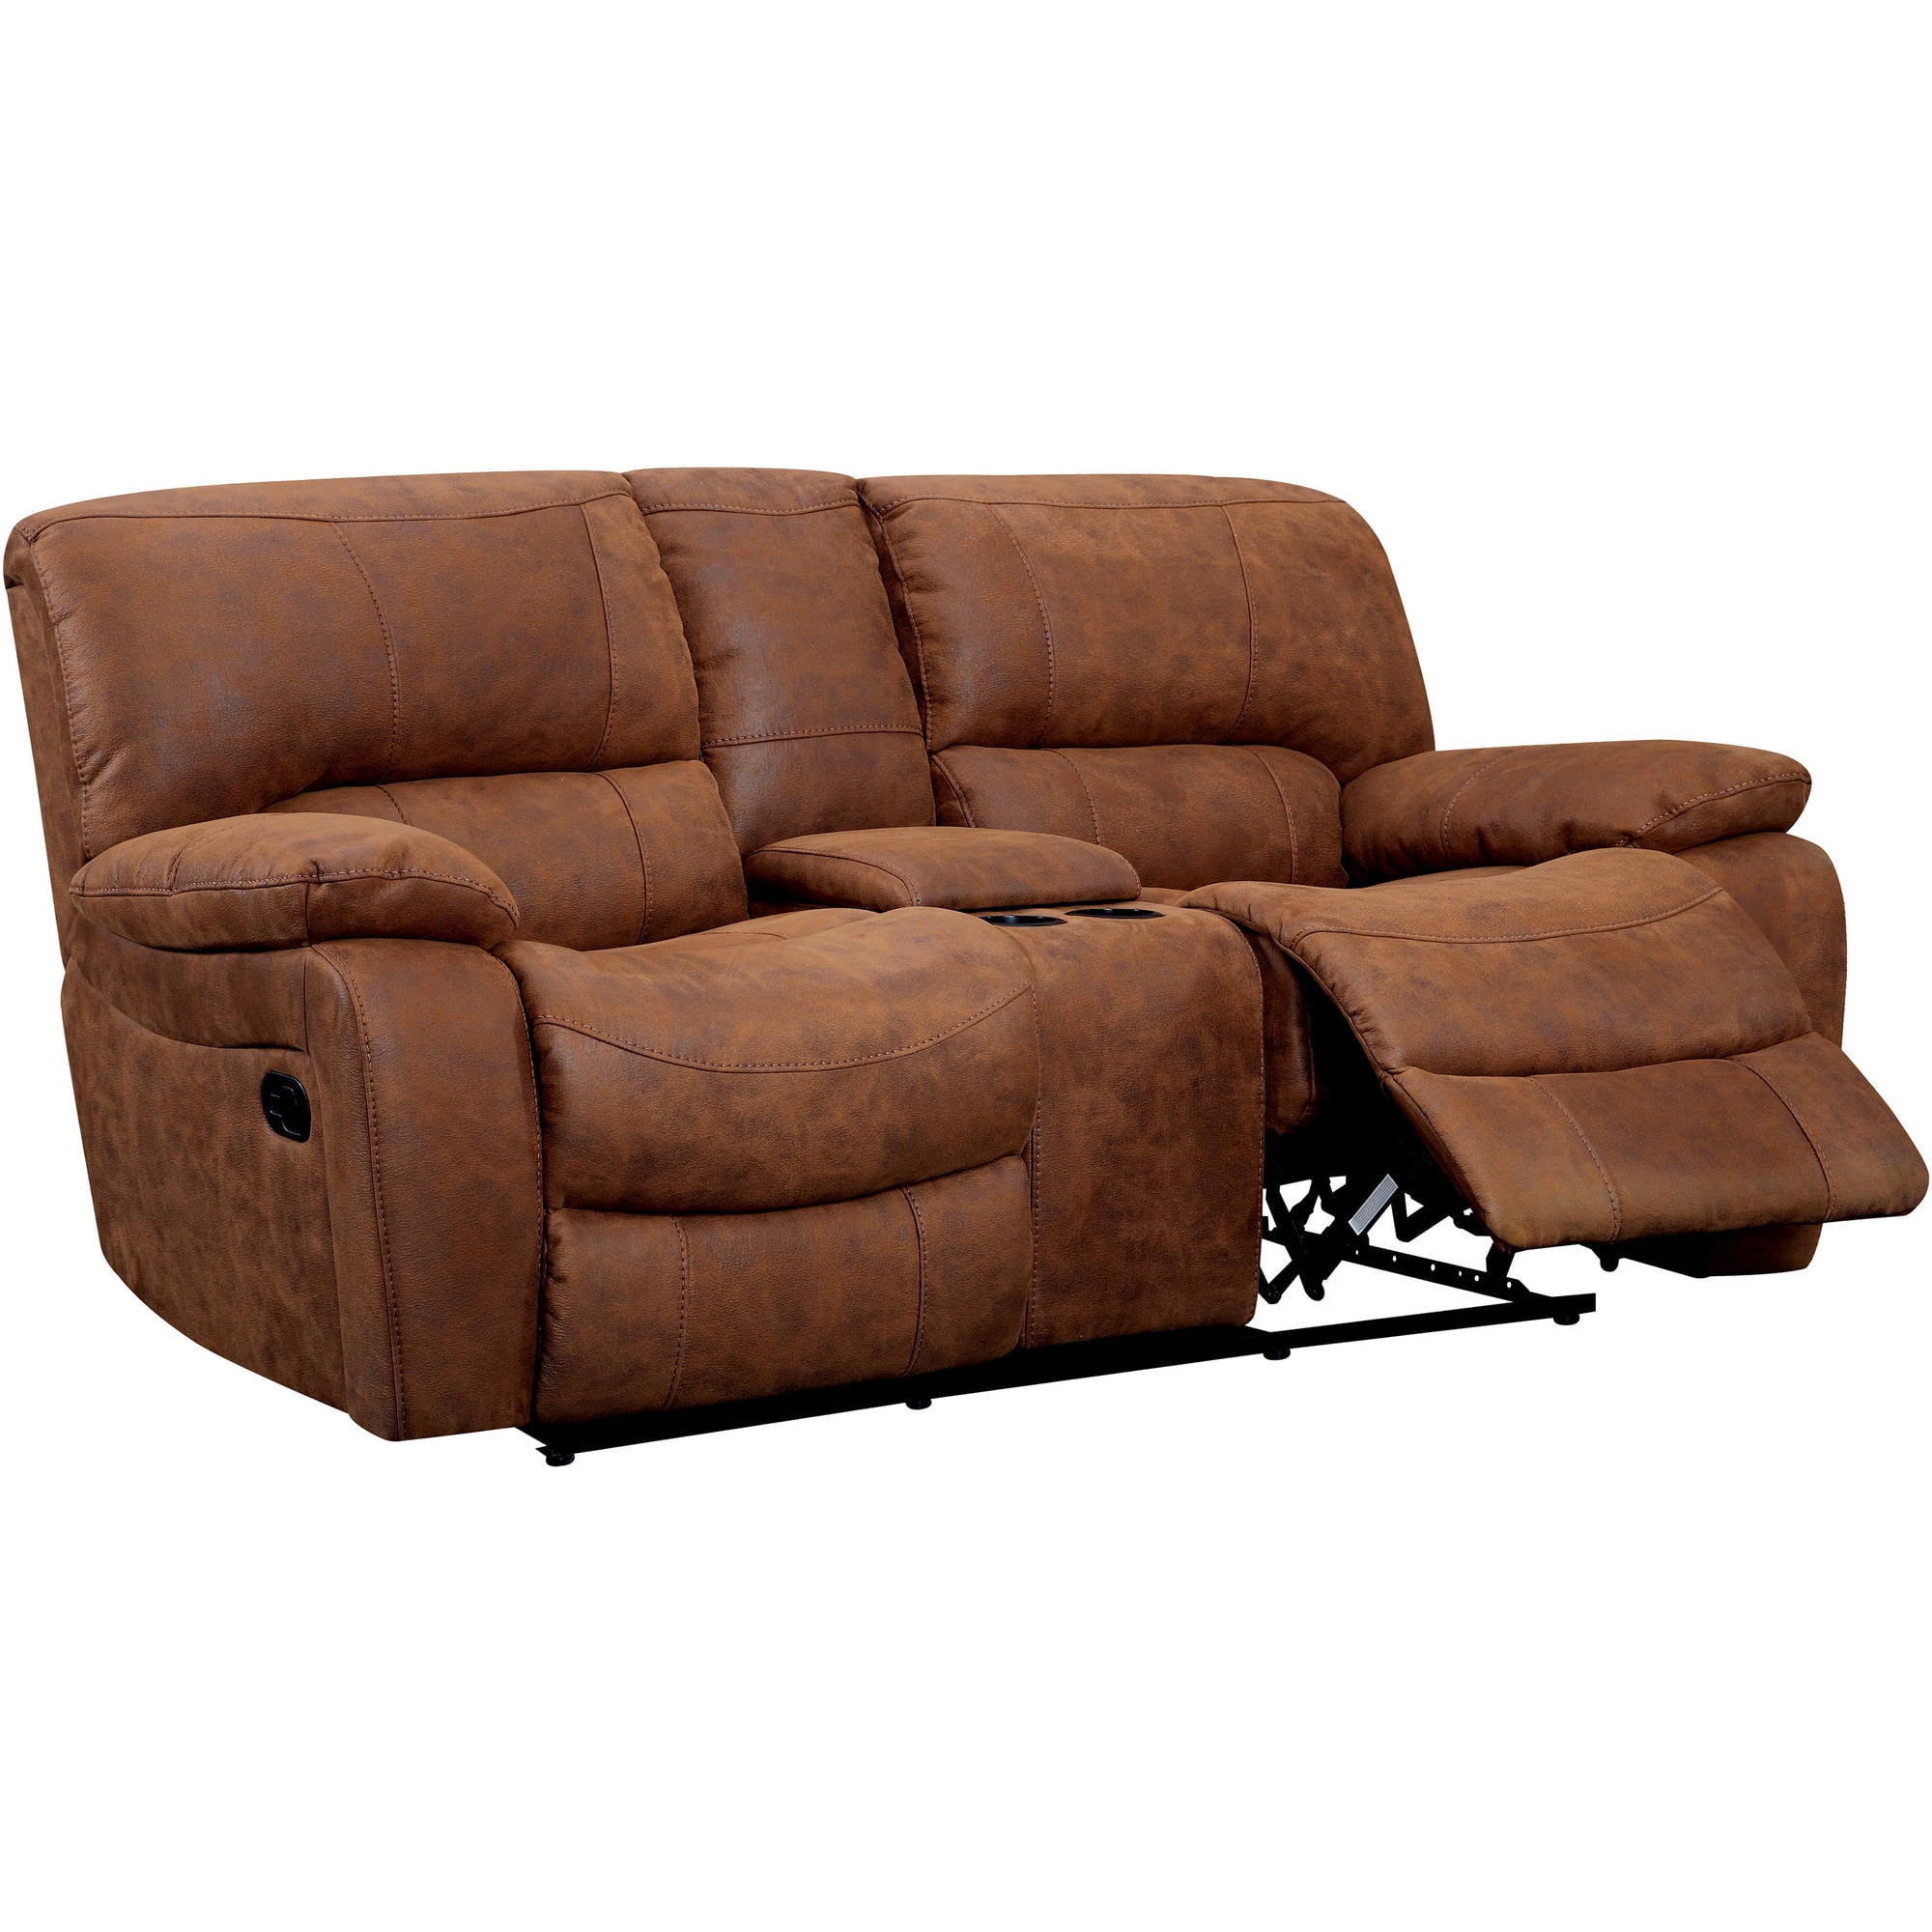 Furniture Of America Renna Faux Leather Reclining Loveseat Brown